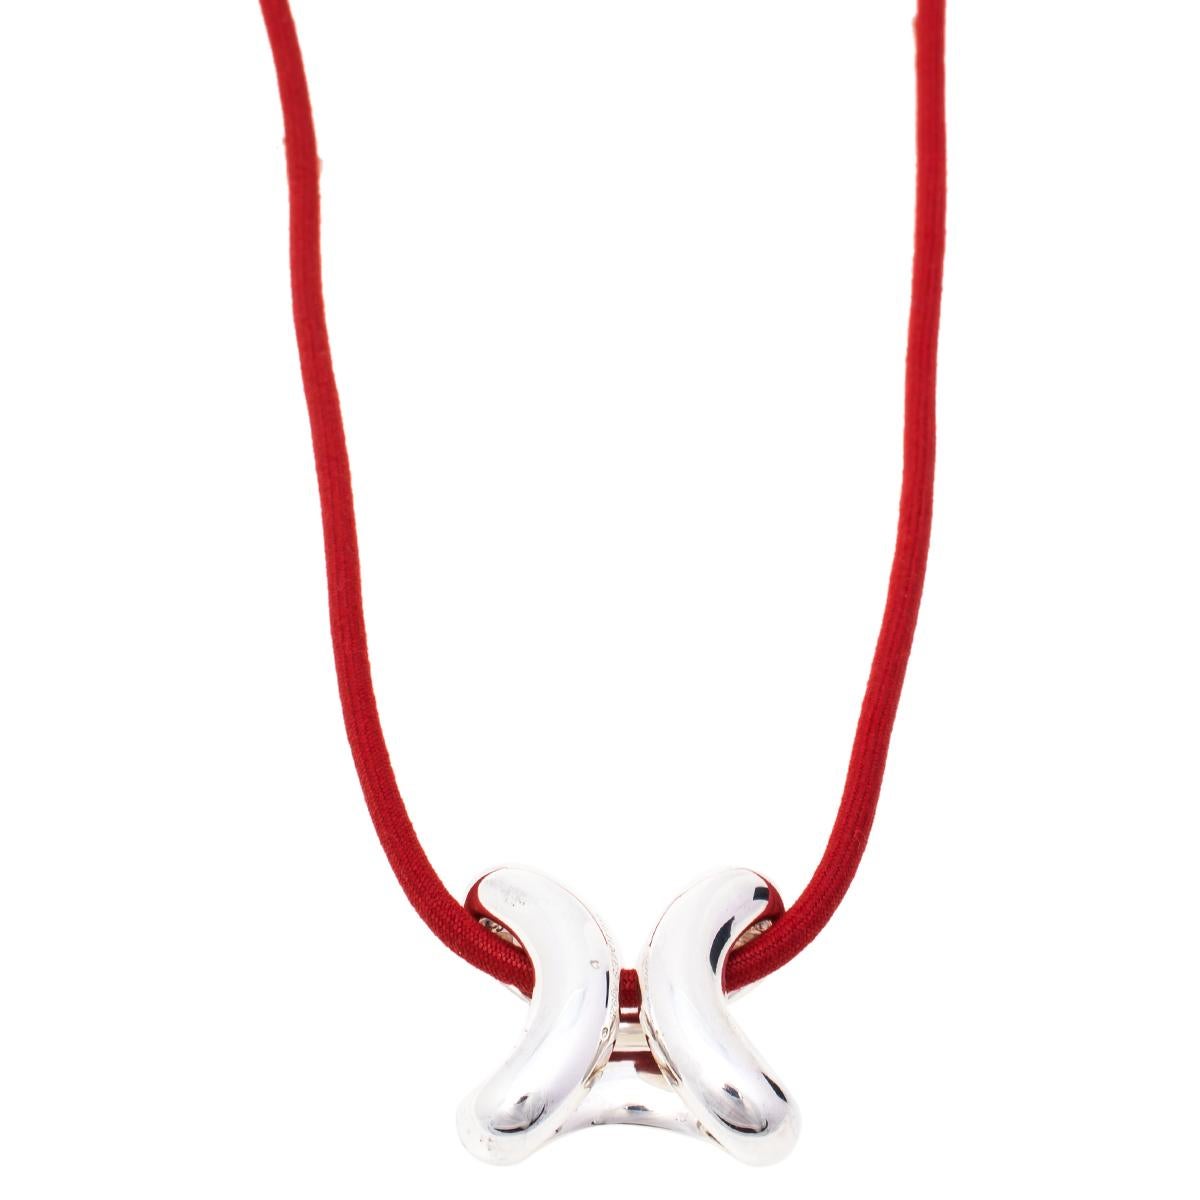 This necklace from Hermes exemplifies minimal style with a stunning carved pendant. The pendant is crafted from silver to a smooth finish and held by a red cord. We're sure this creation will elevate the way you accessorise.

Includes: Original Box,